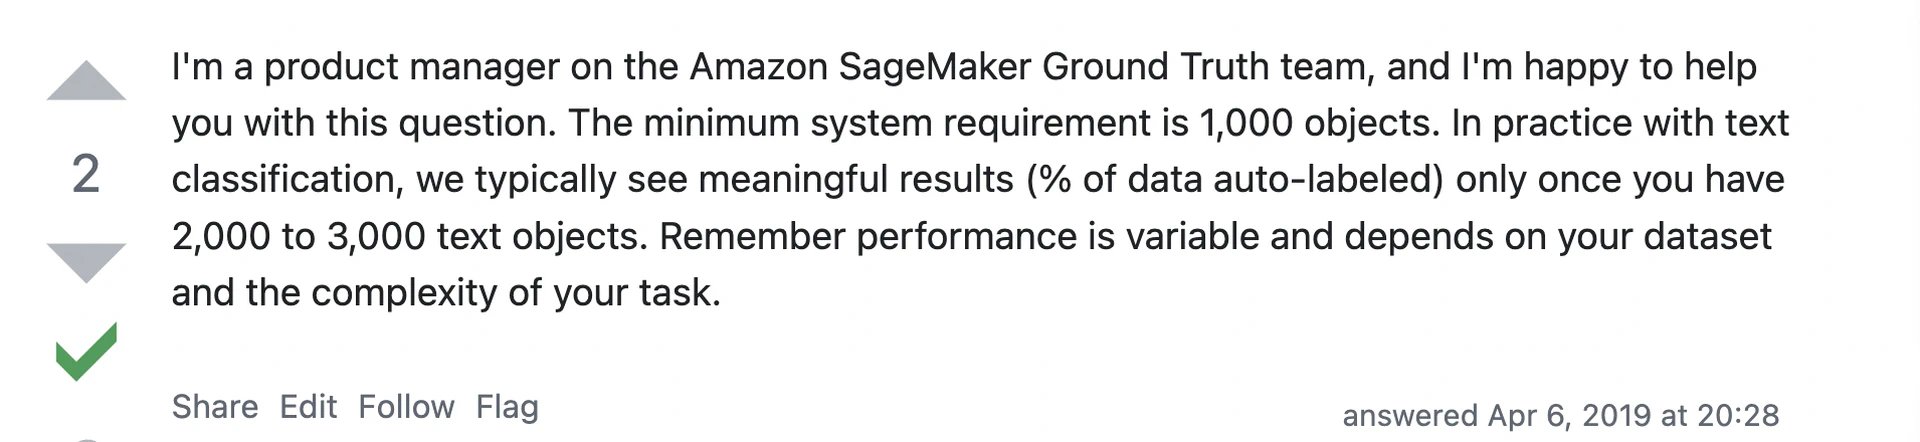 An example of Amazon Sagemaker team monitoring and supporting SO practitioners' queries (55553190).